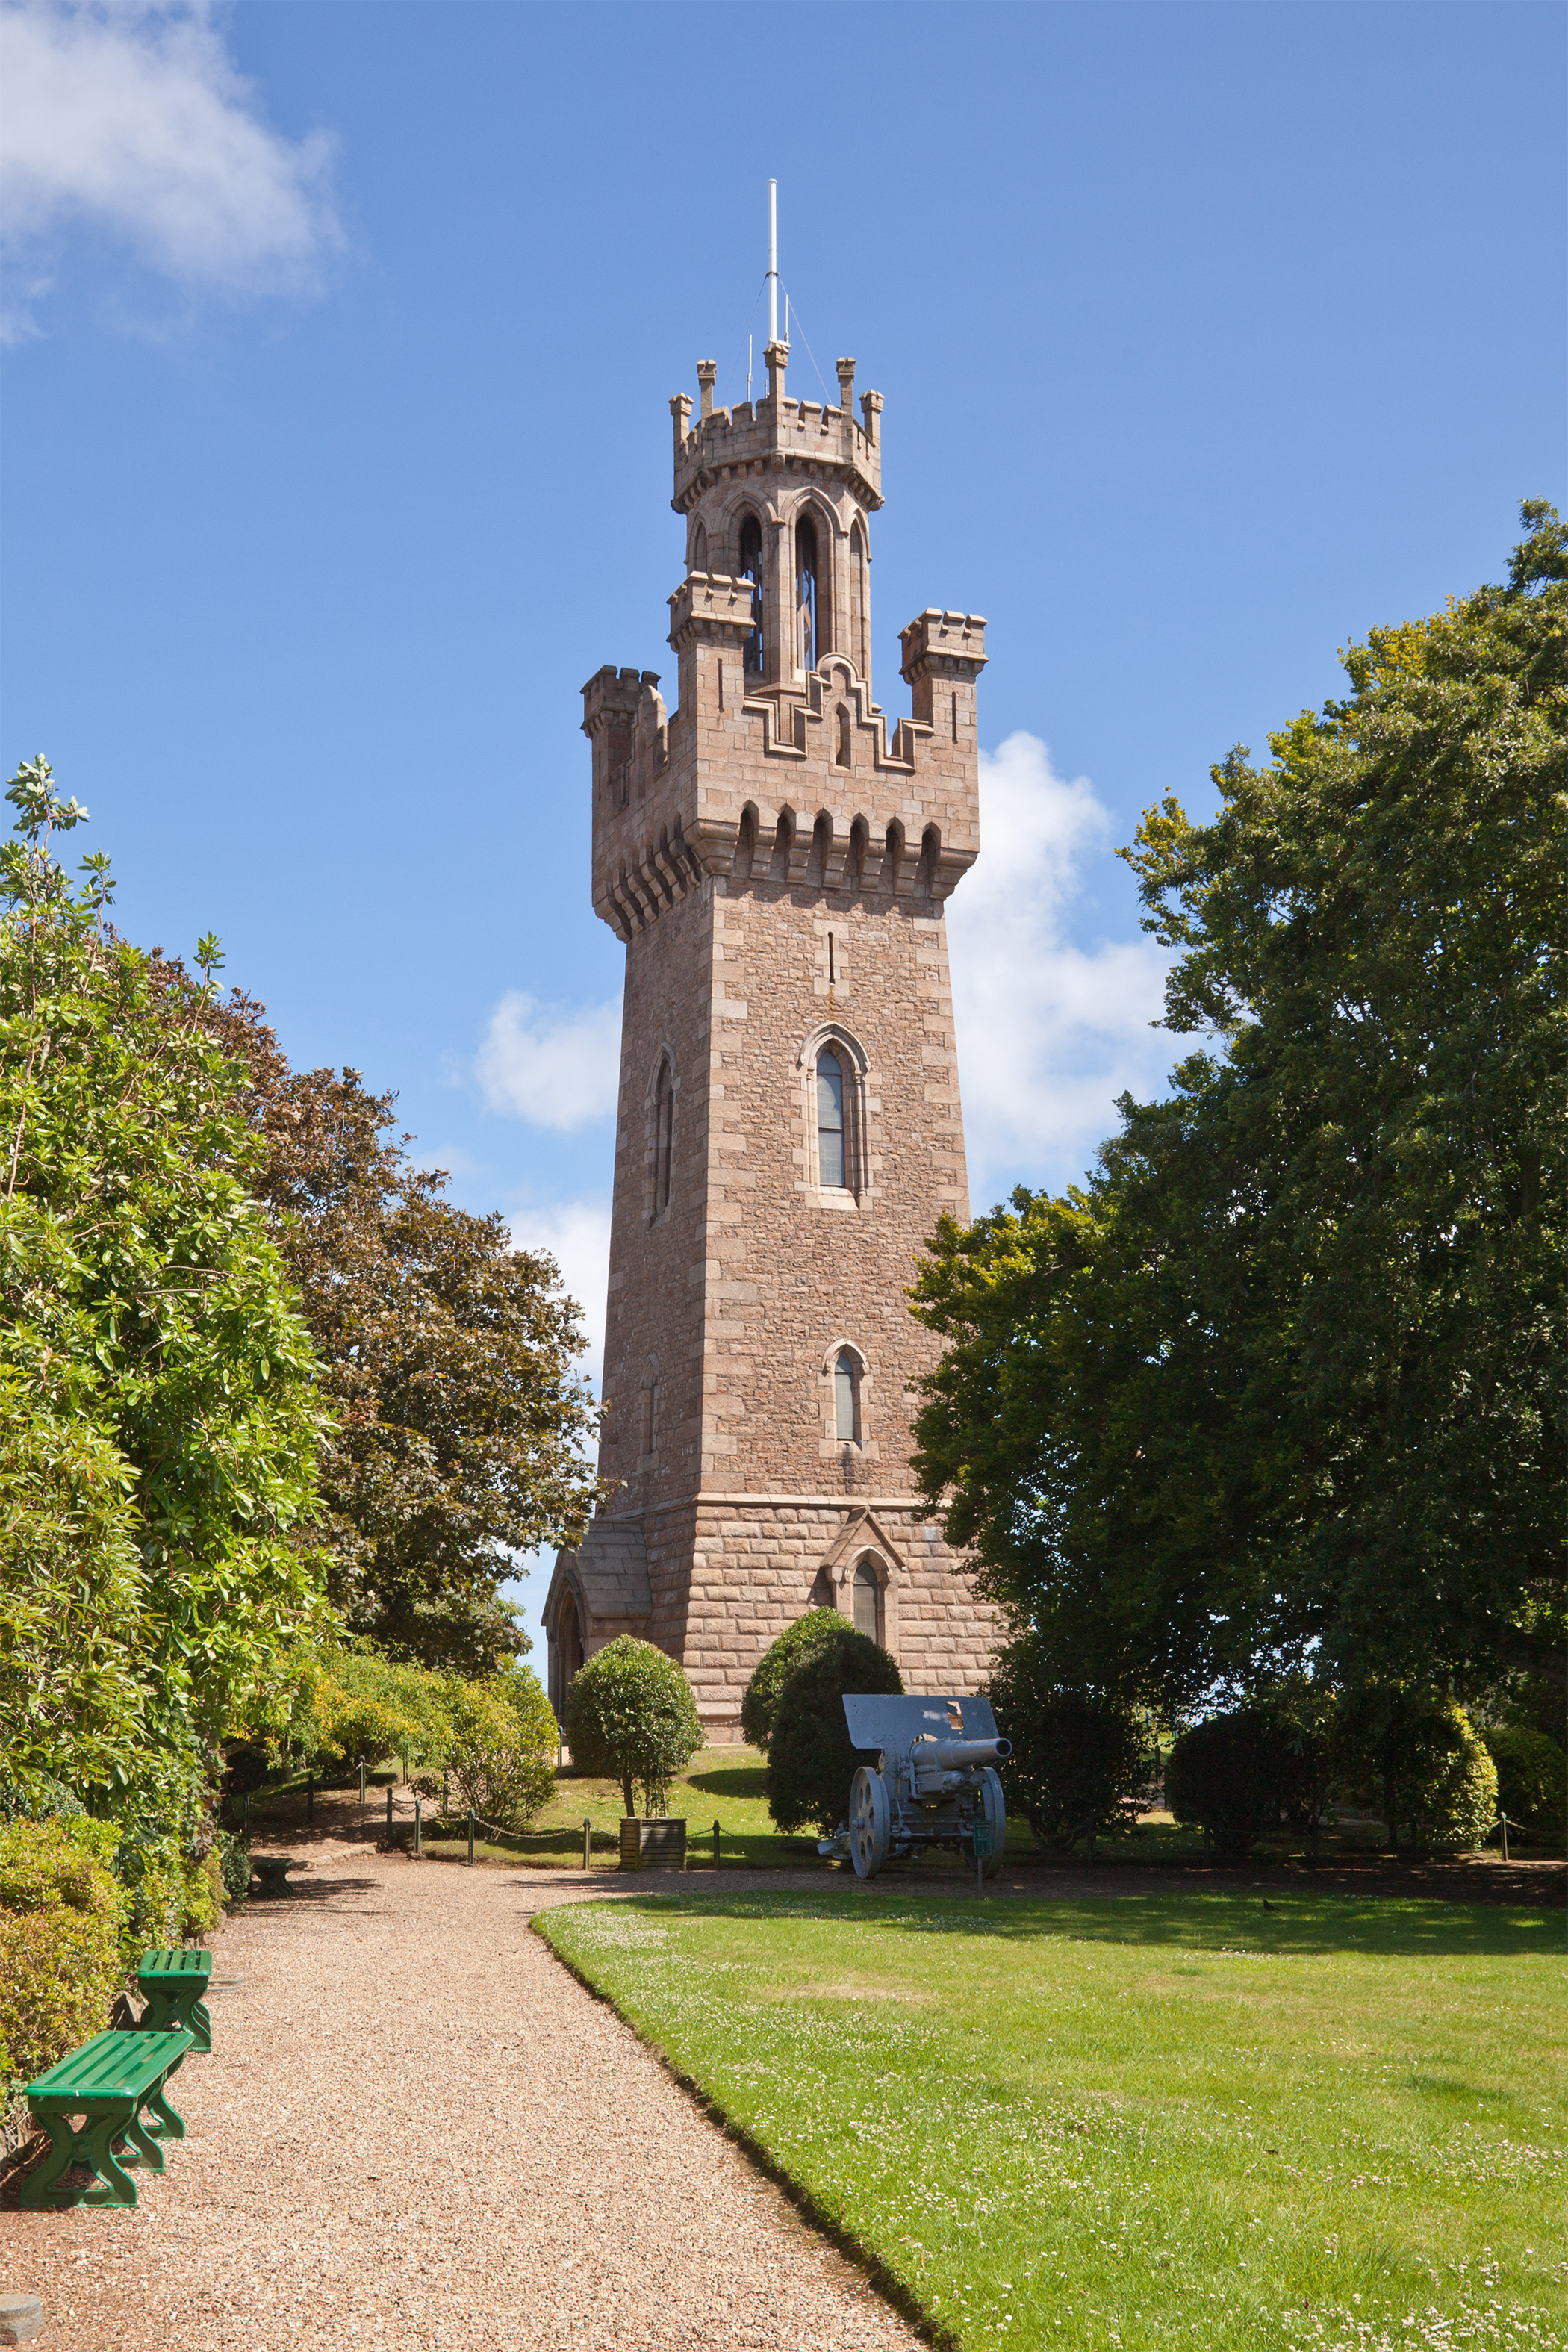 File:Victoria Tower St Peter Port.jpg - Wikimedia Commons